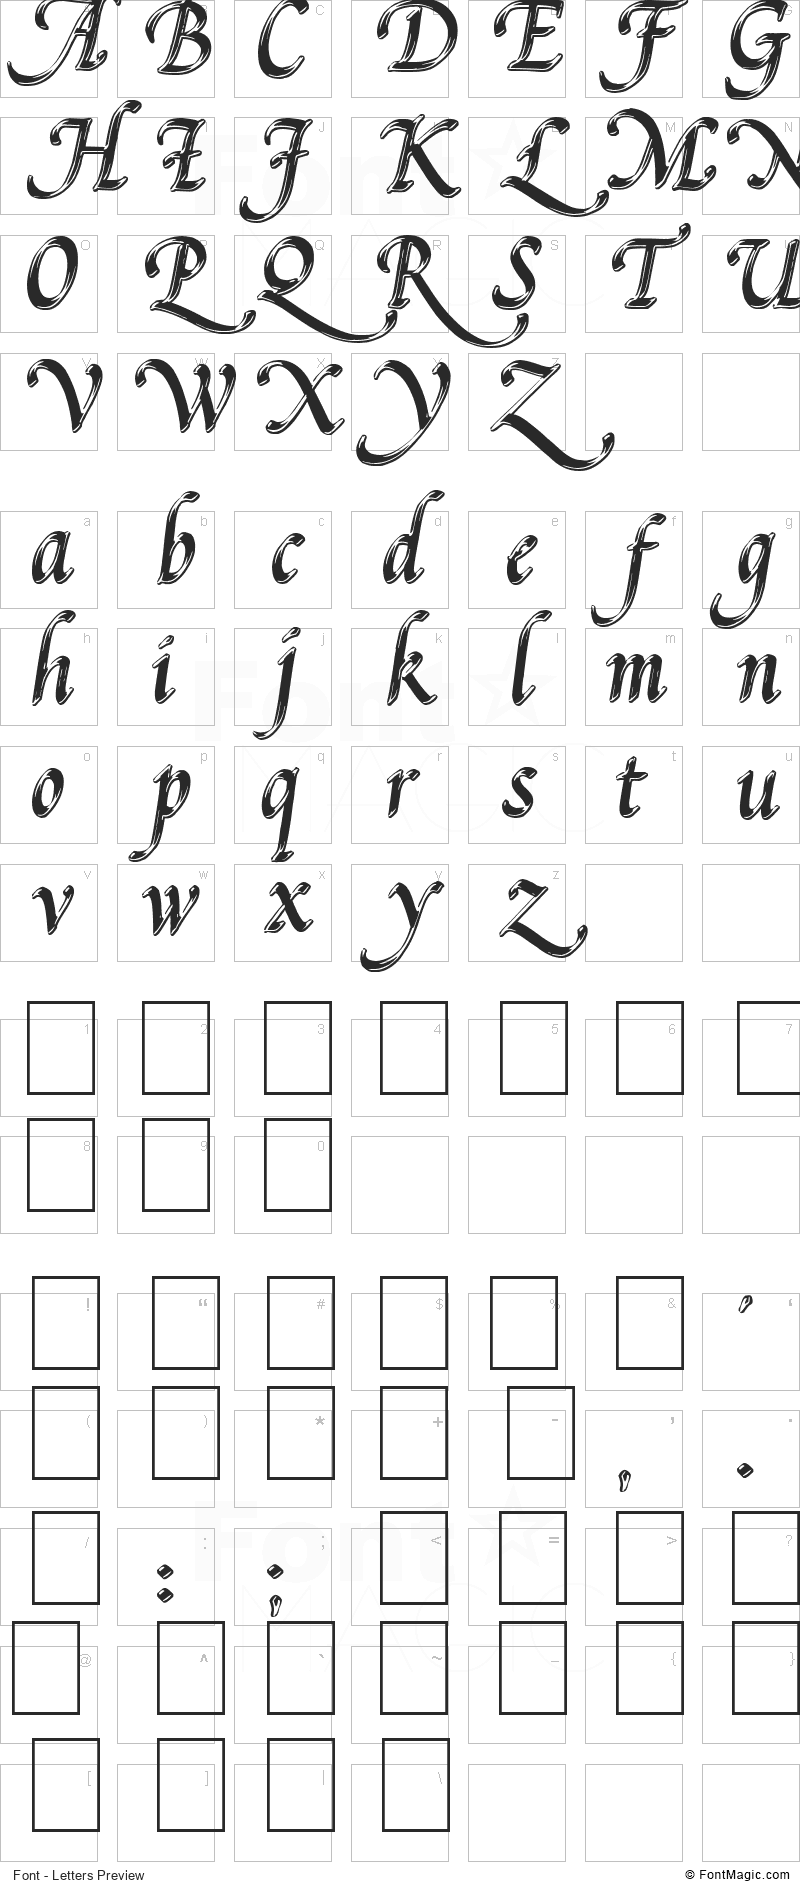 Pal Mod Font - All Latters Preview Chart